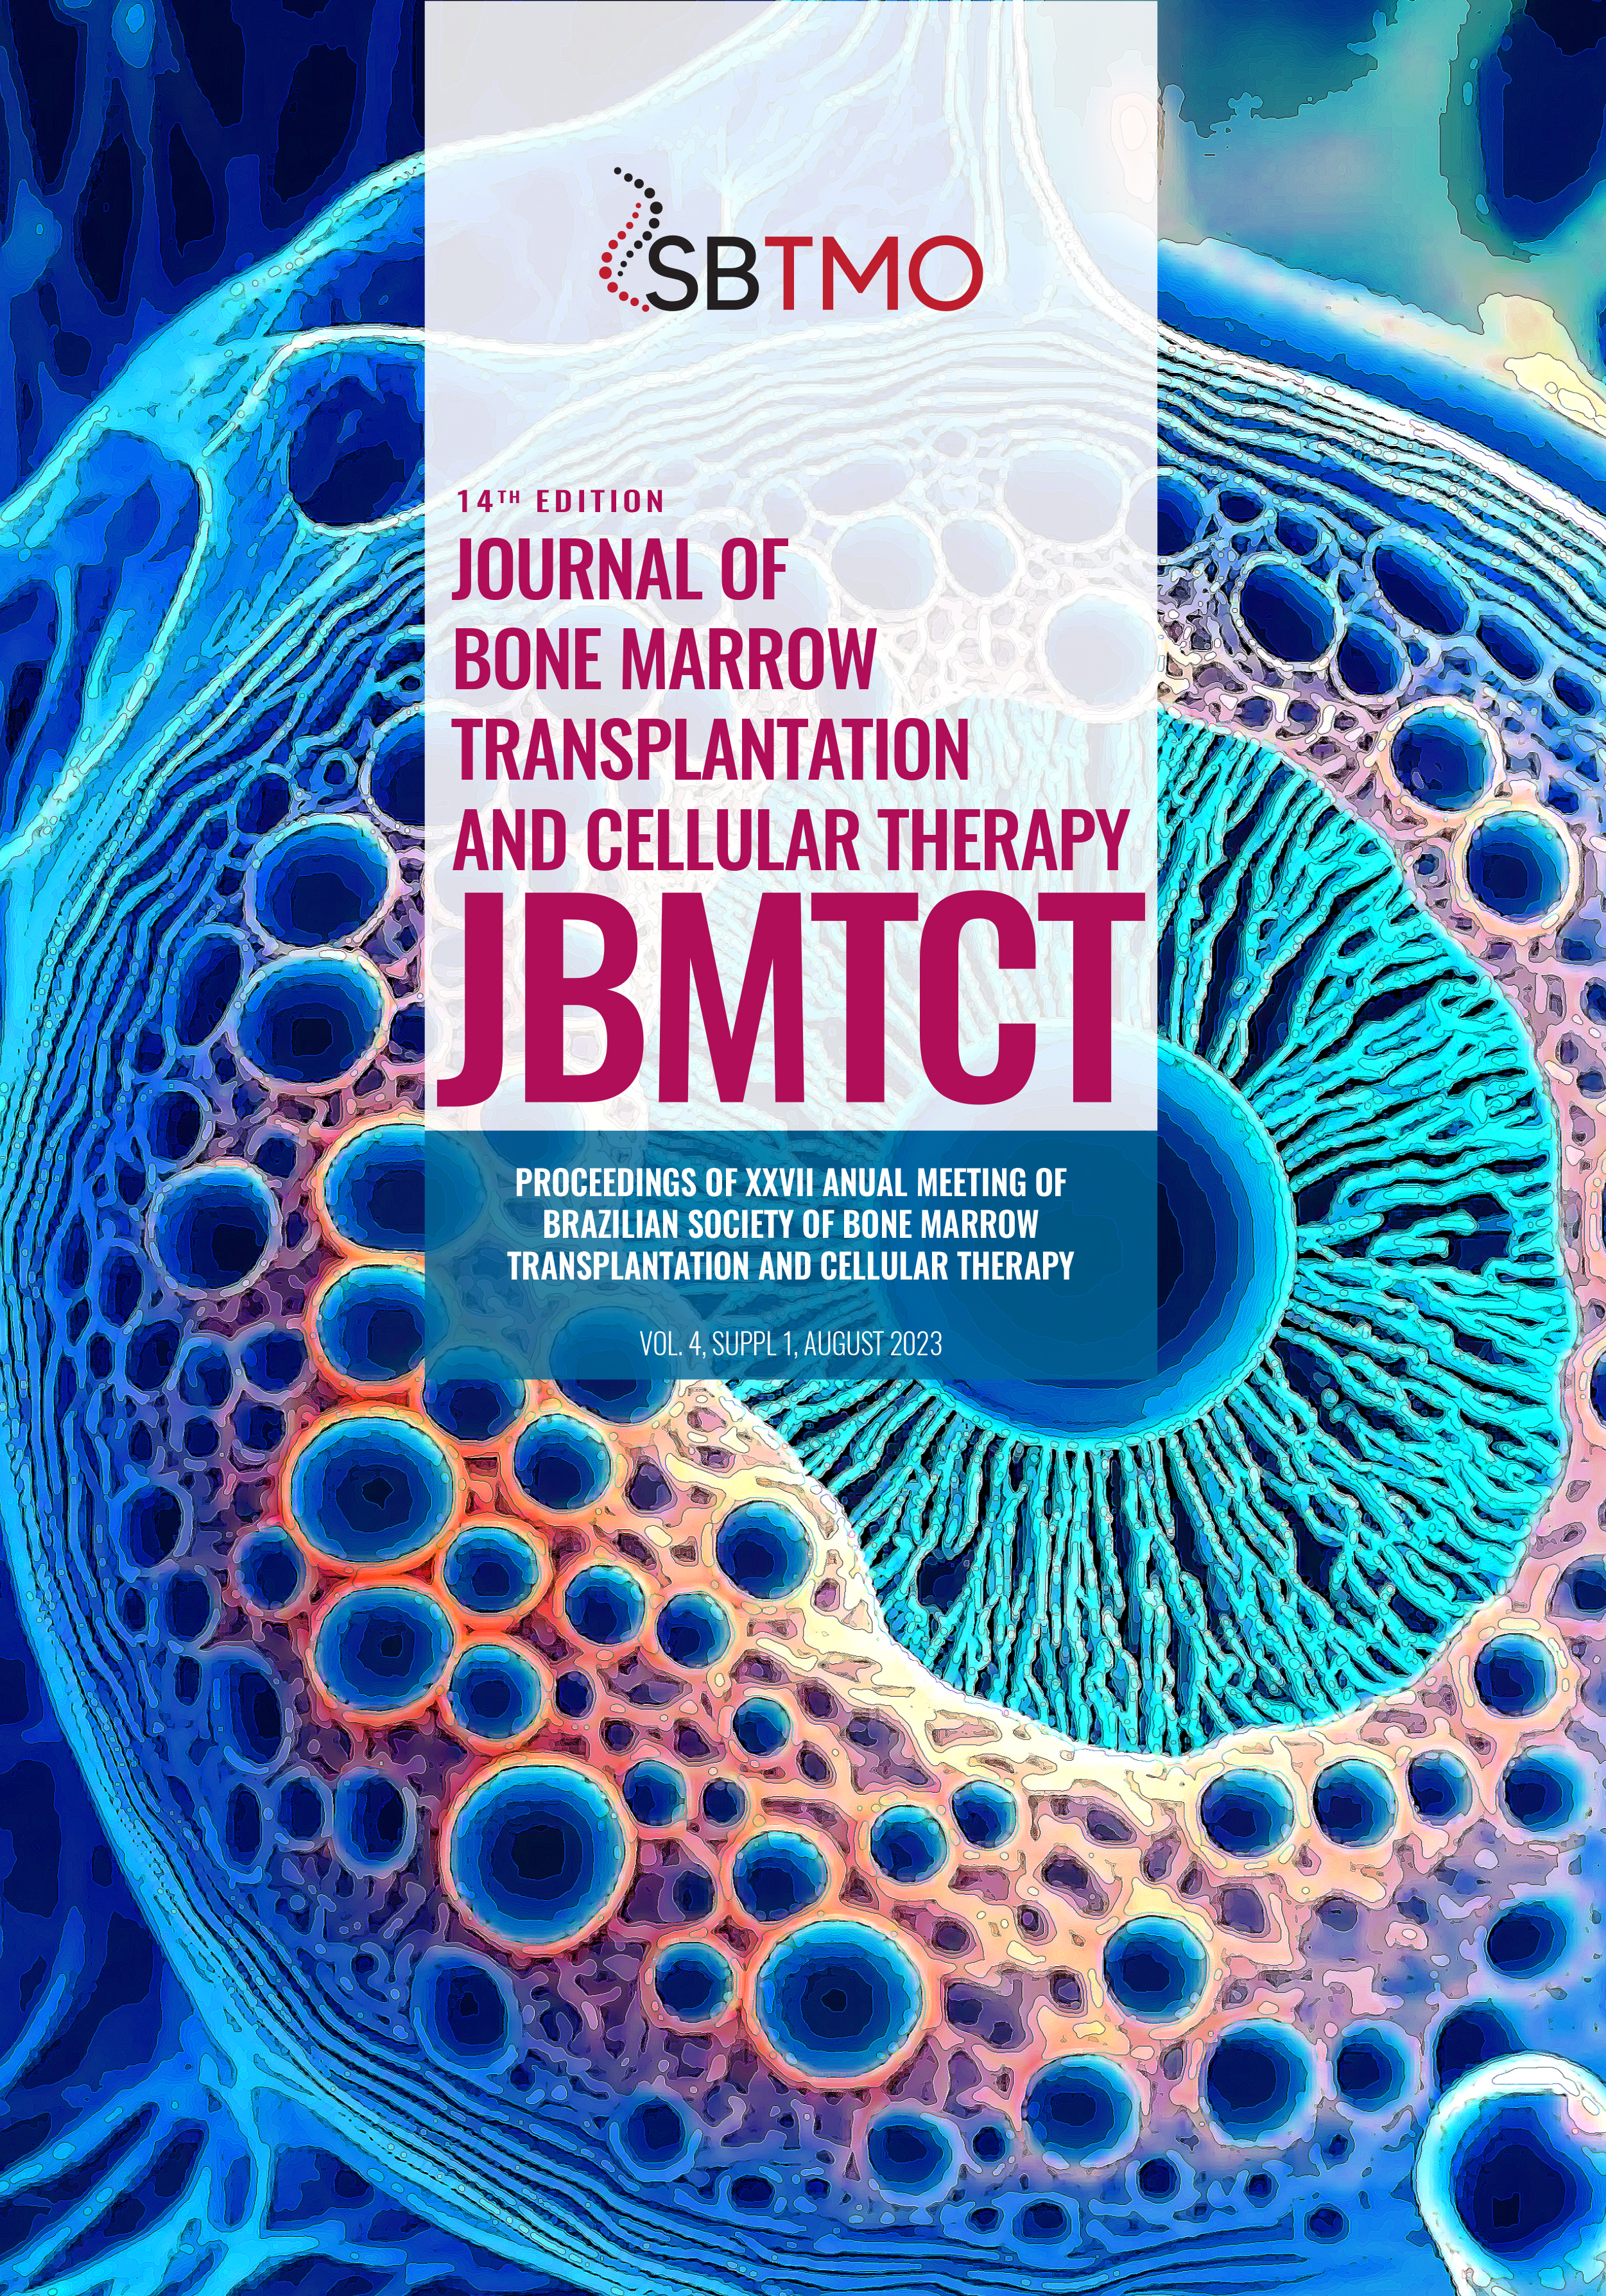 					View Vol. 4 No. suppl1 (2023): PROCEEDINGS OF XXVII ANUAL MEETING OF  BRAZILIAN SOCIETY OF BONE MARROW  TRANSPLANTATION AND CELLULAR THERAPY
				